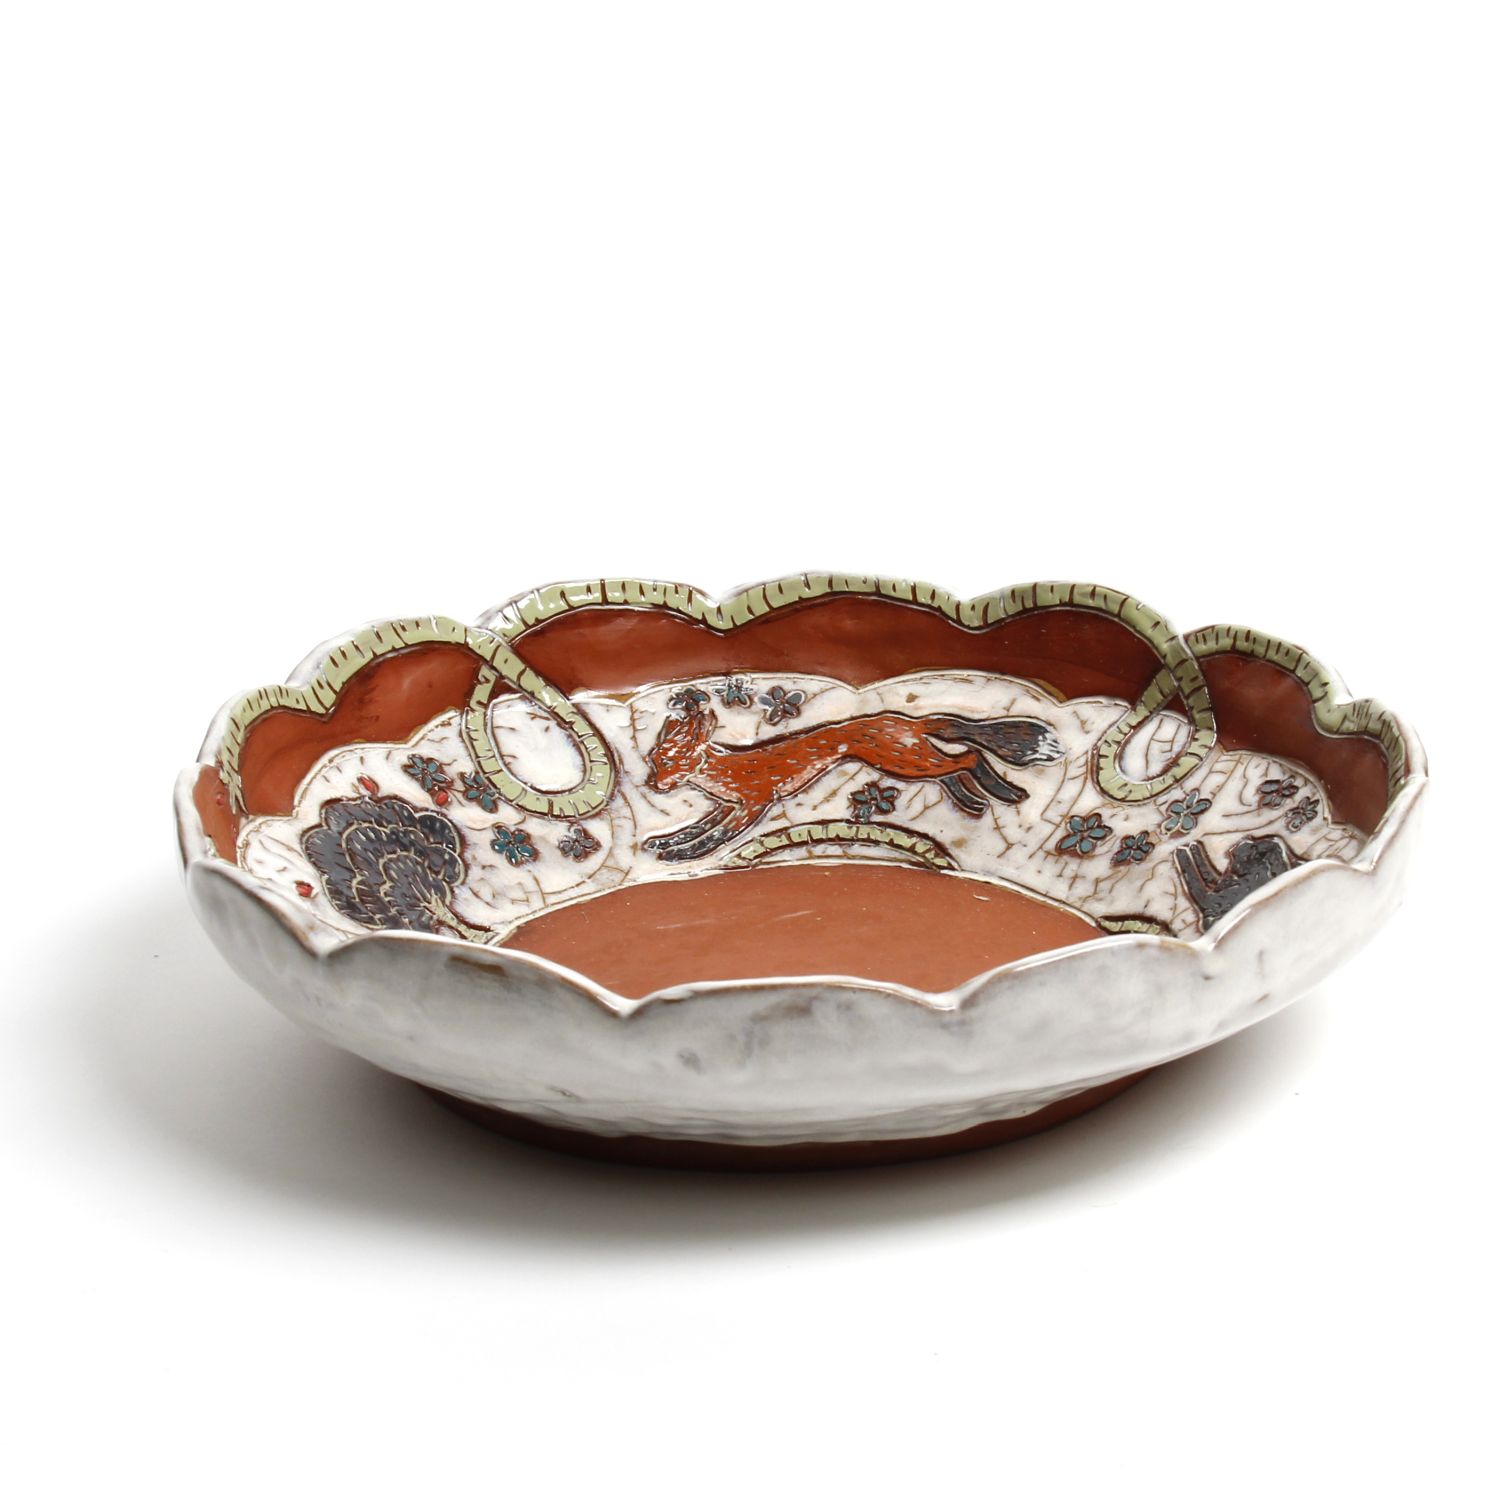 Zoe Pinnell: Fox Serving Bowl Product Image 3 of 4